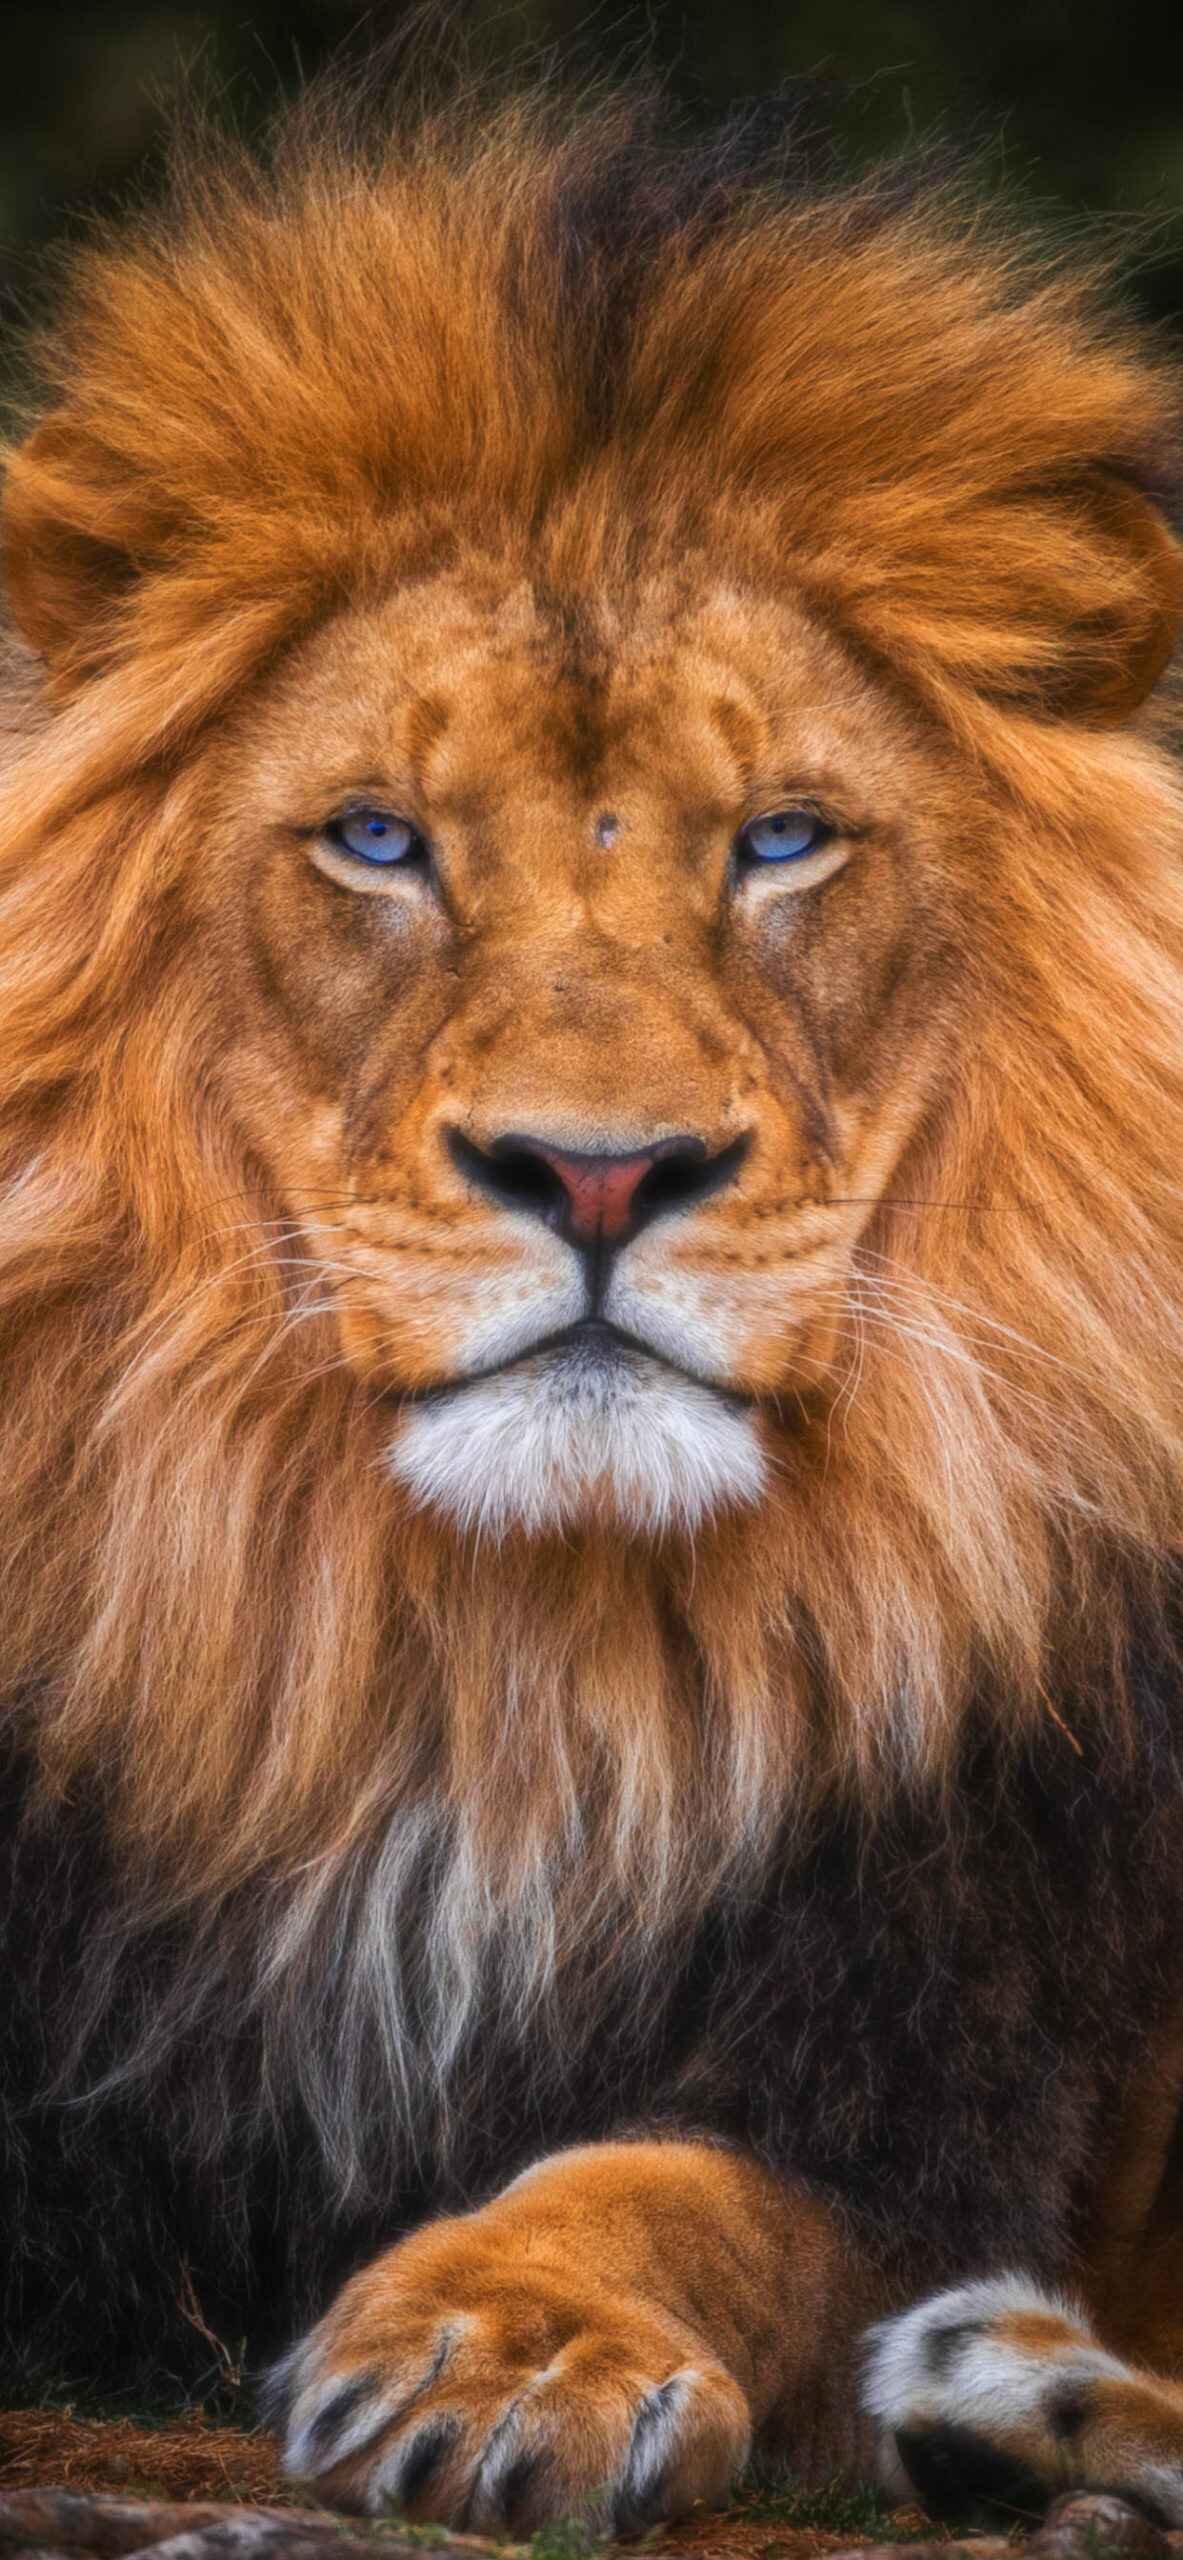 Lion: It has been depicted as "king of the jungle" and "king of beasts", and thus became a popular symbol for royalty and stateliness. 1190x2560 HD Background.